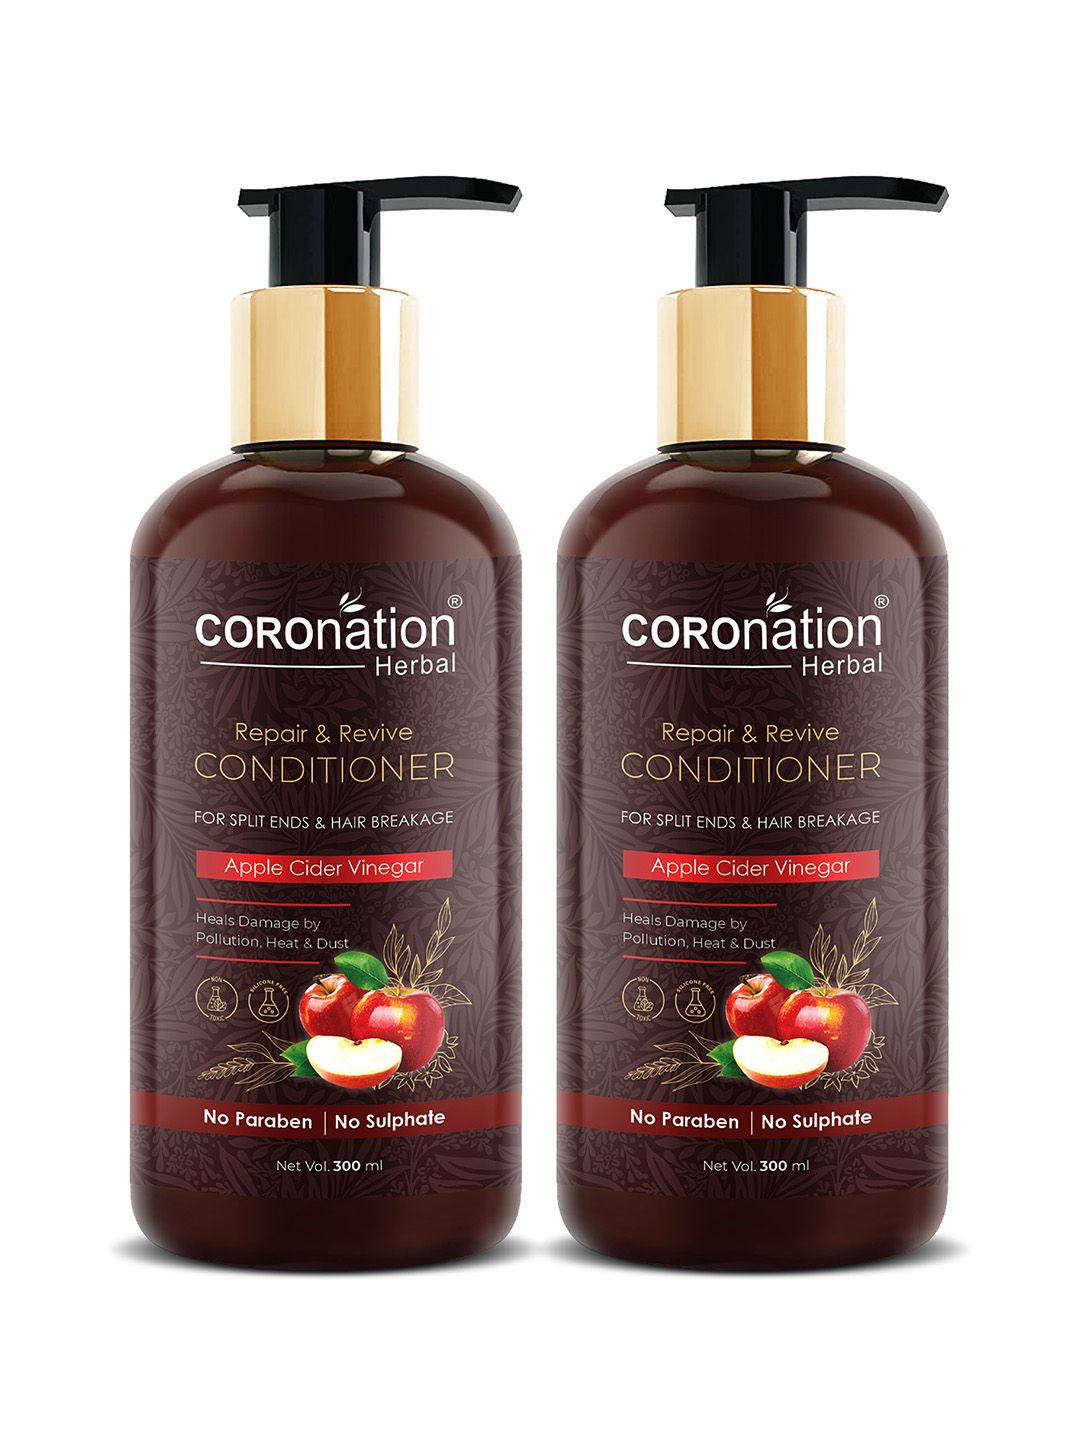 COROnation Herbal Set of 2 Repair & Revive Hair Conditioner with Apple Cider Vinegar 600ml Price in India